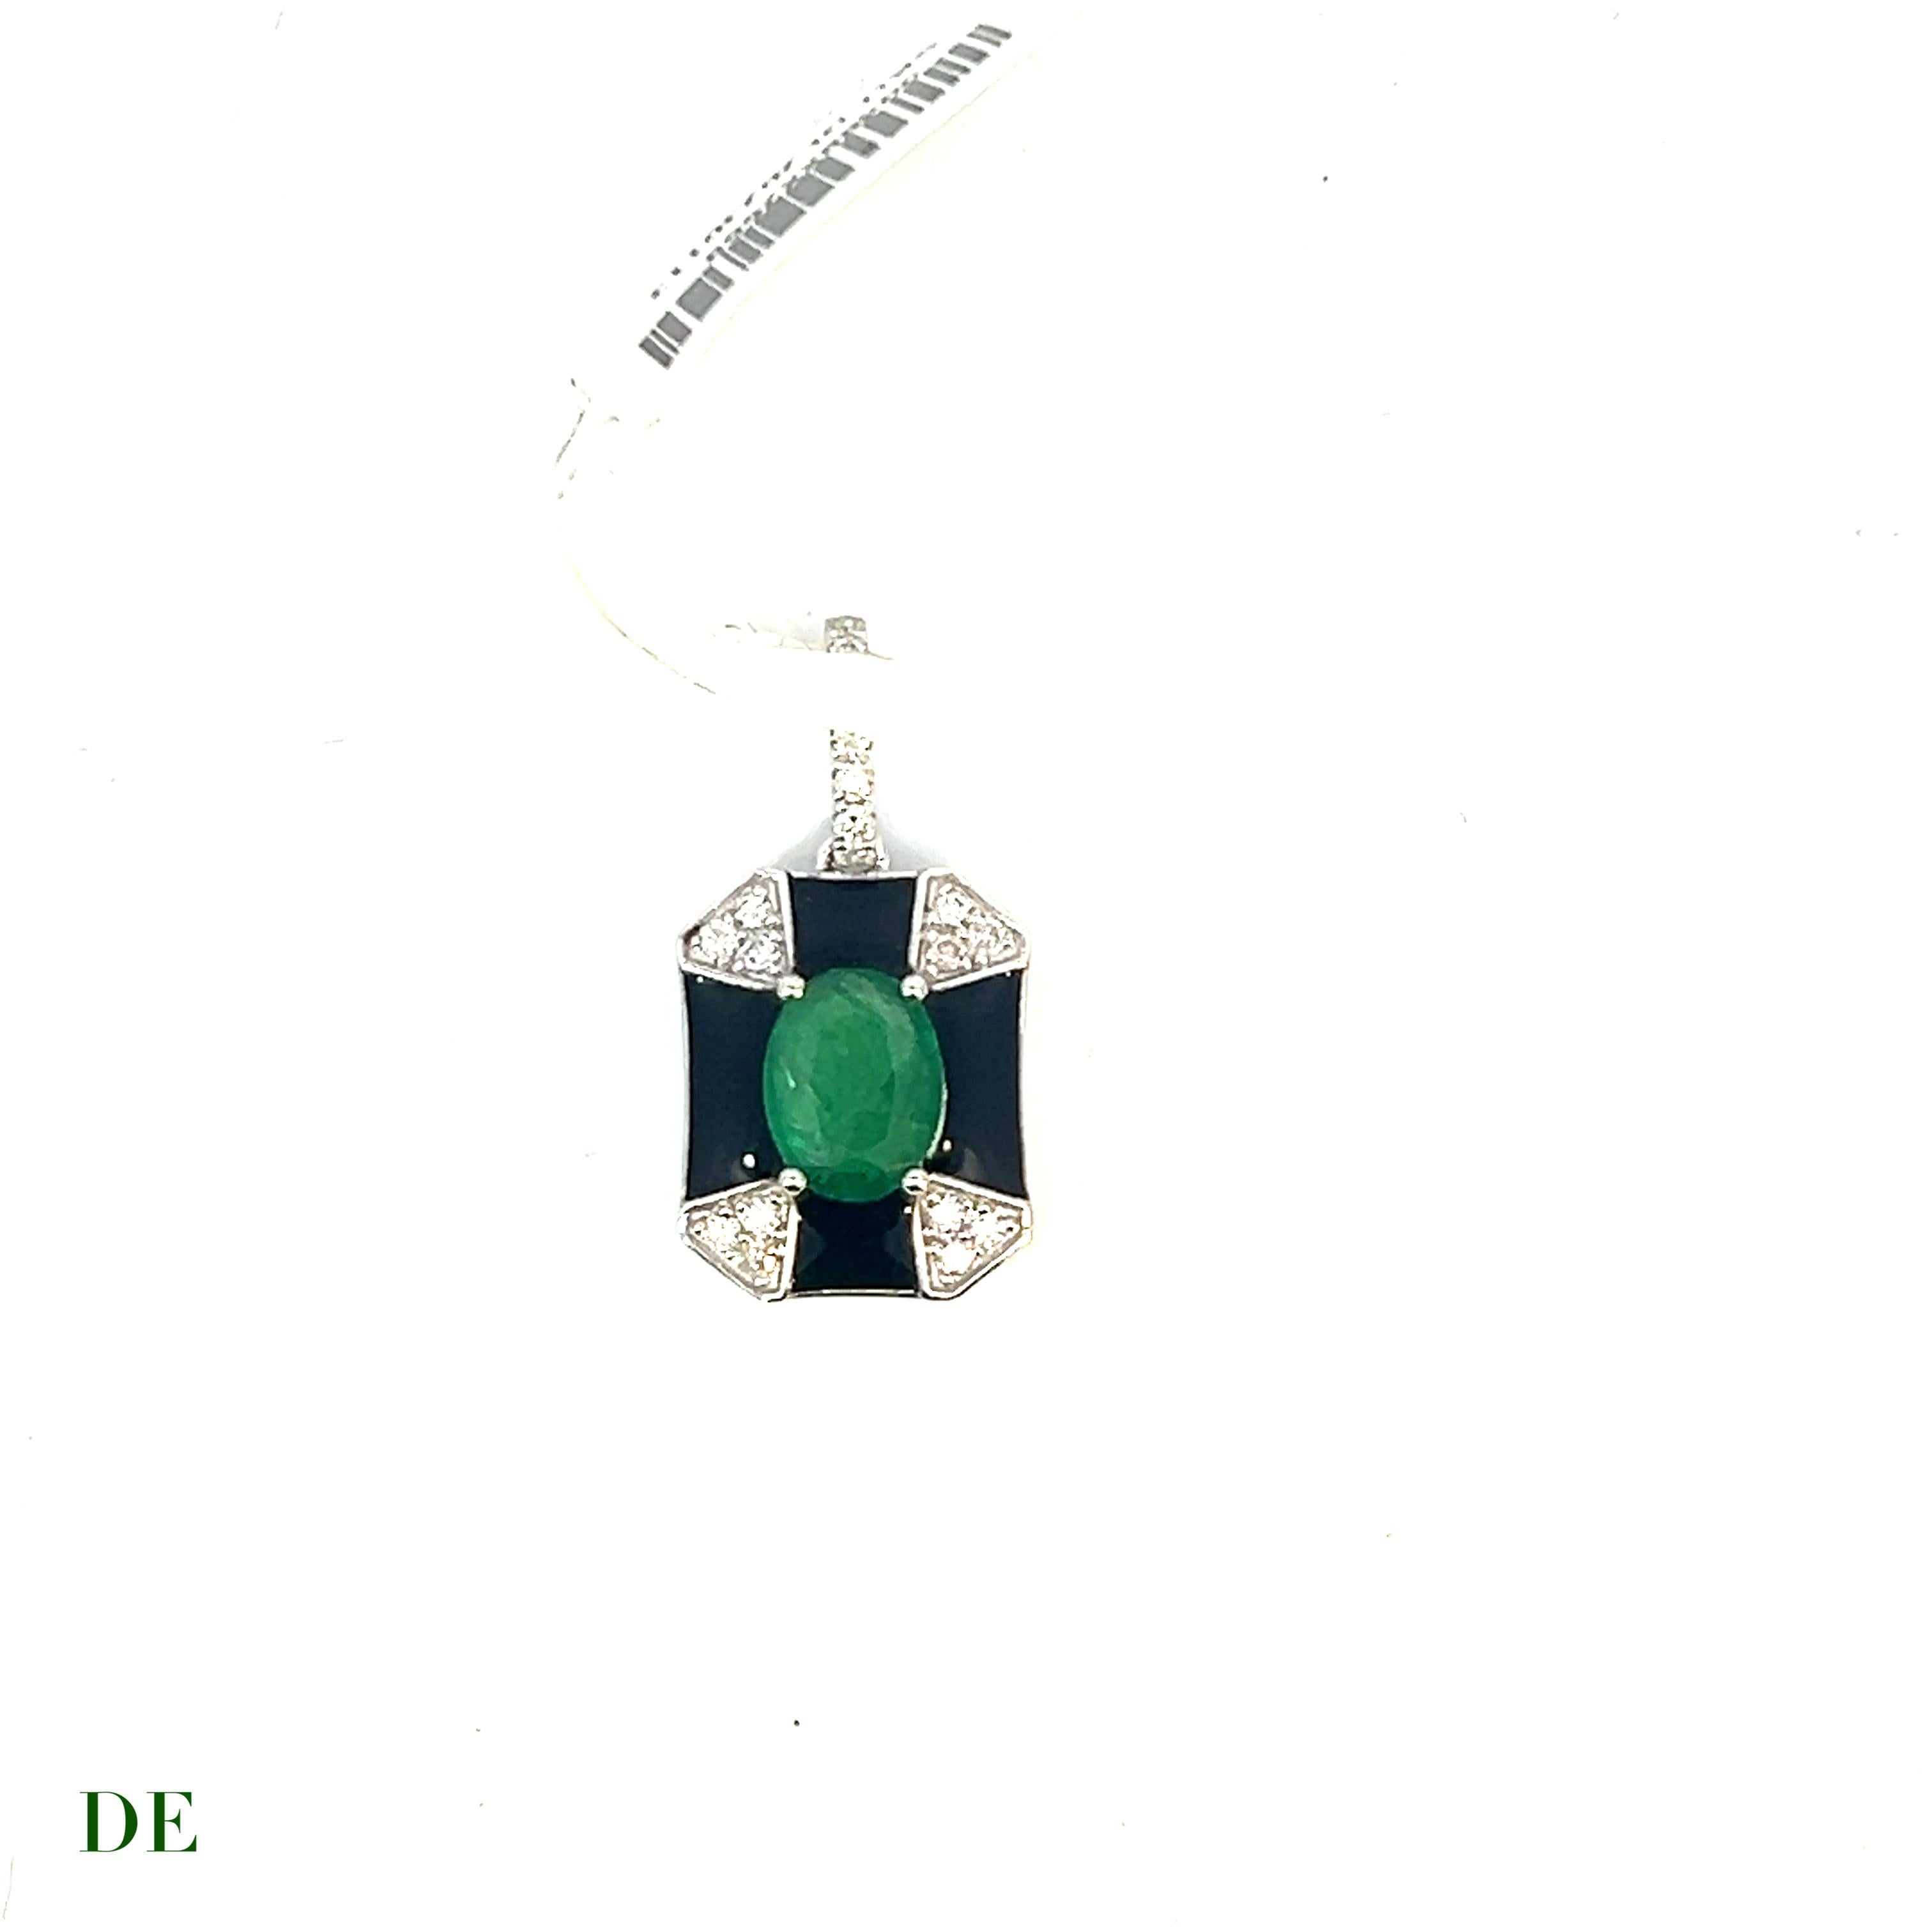 Indulge in the enchanting brilliance of the Enchanting Brilliance Elegance Shield 14k Gold Pendant. This exquisite pendant features a captivating 1.44 carat emerald, radiating with a mesmerizing green hue that captures the essence of natural beauty.